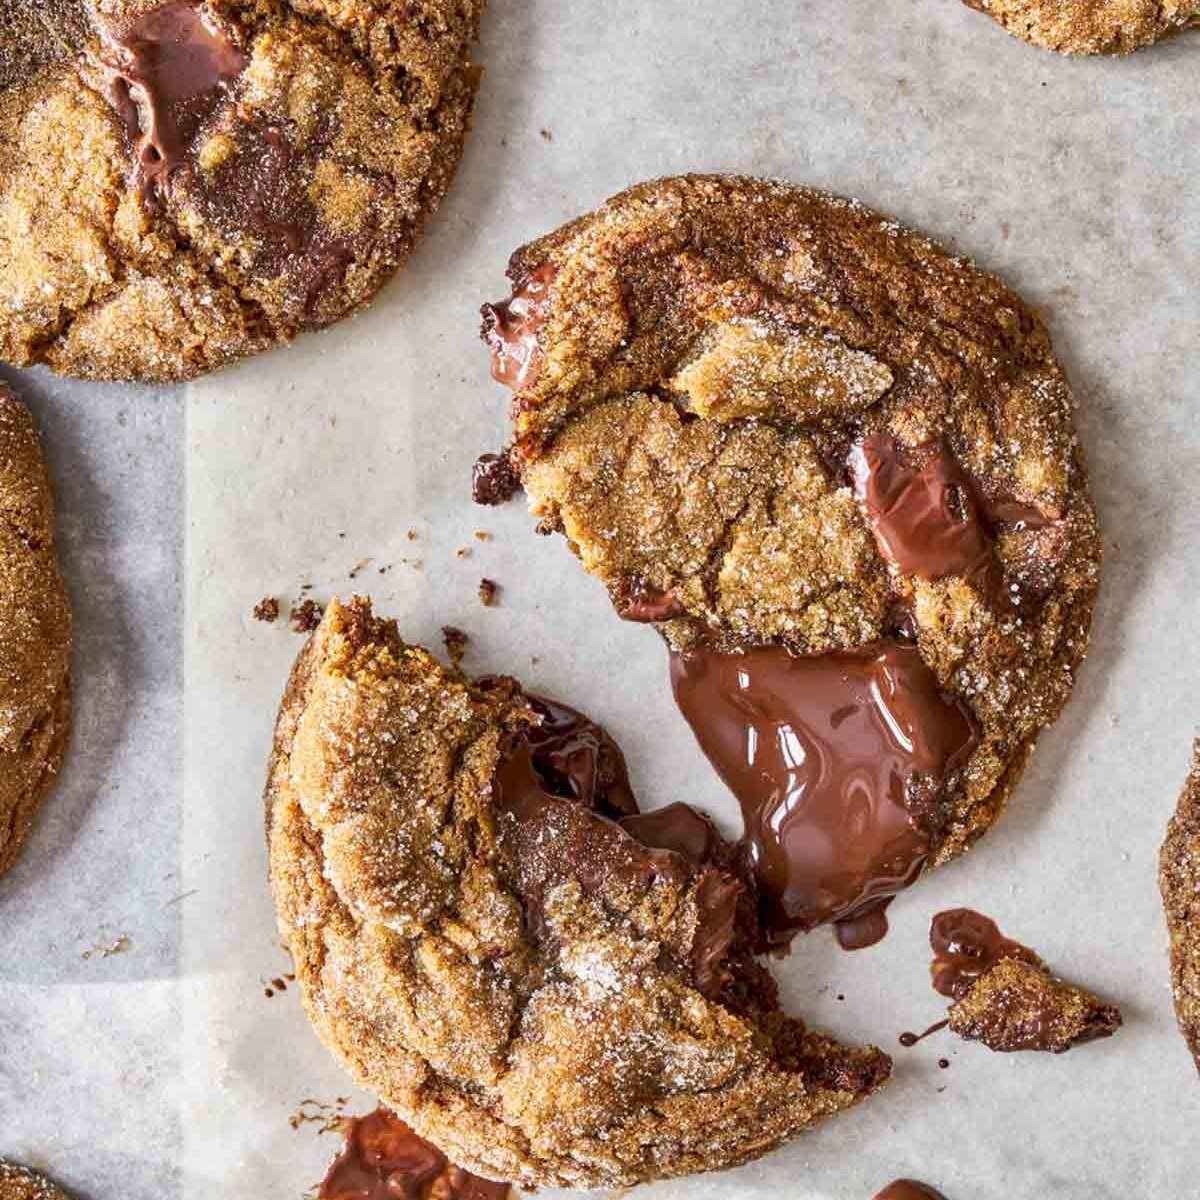 Ginger Chocolate Chunk Cookies by David Leite